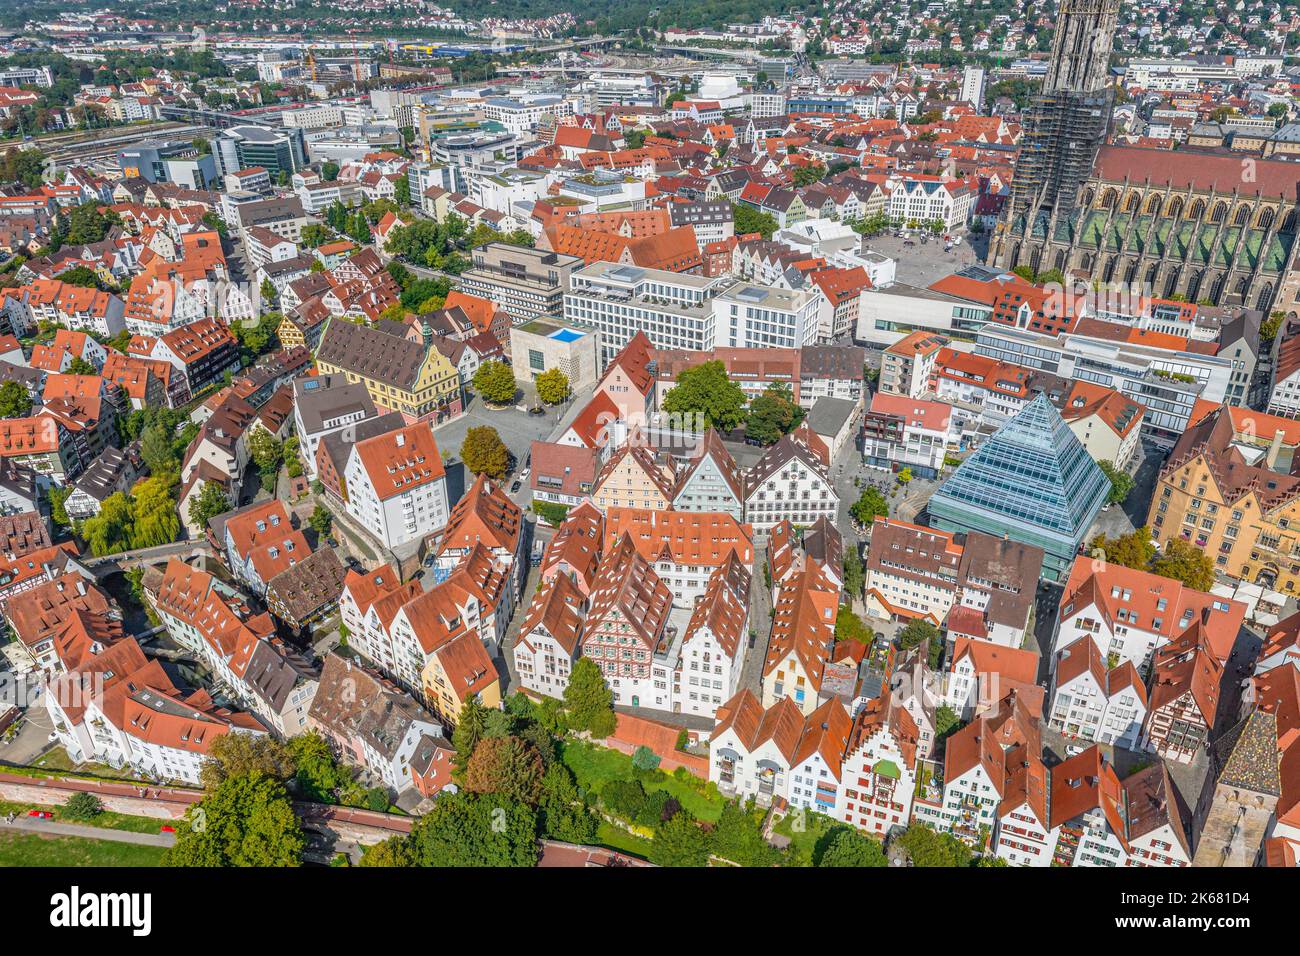 The city of Ulm with its famous Ulmer Münster from above Stock Photo